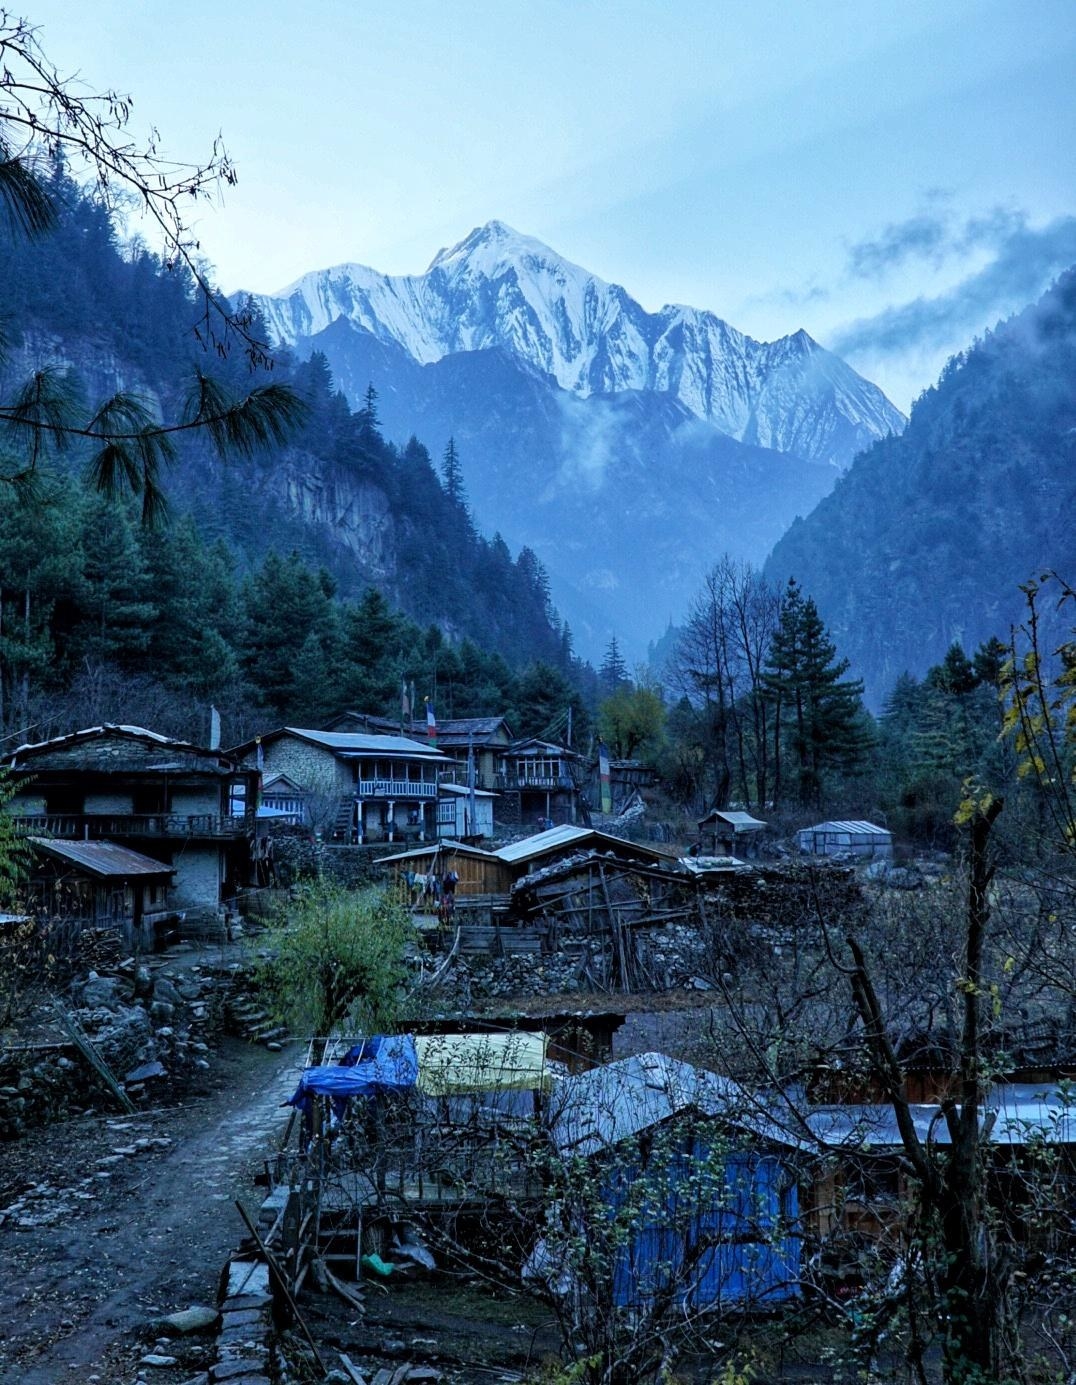 A view of a village in a valley near the base of the Himalaya Mountains in Nepal